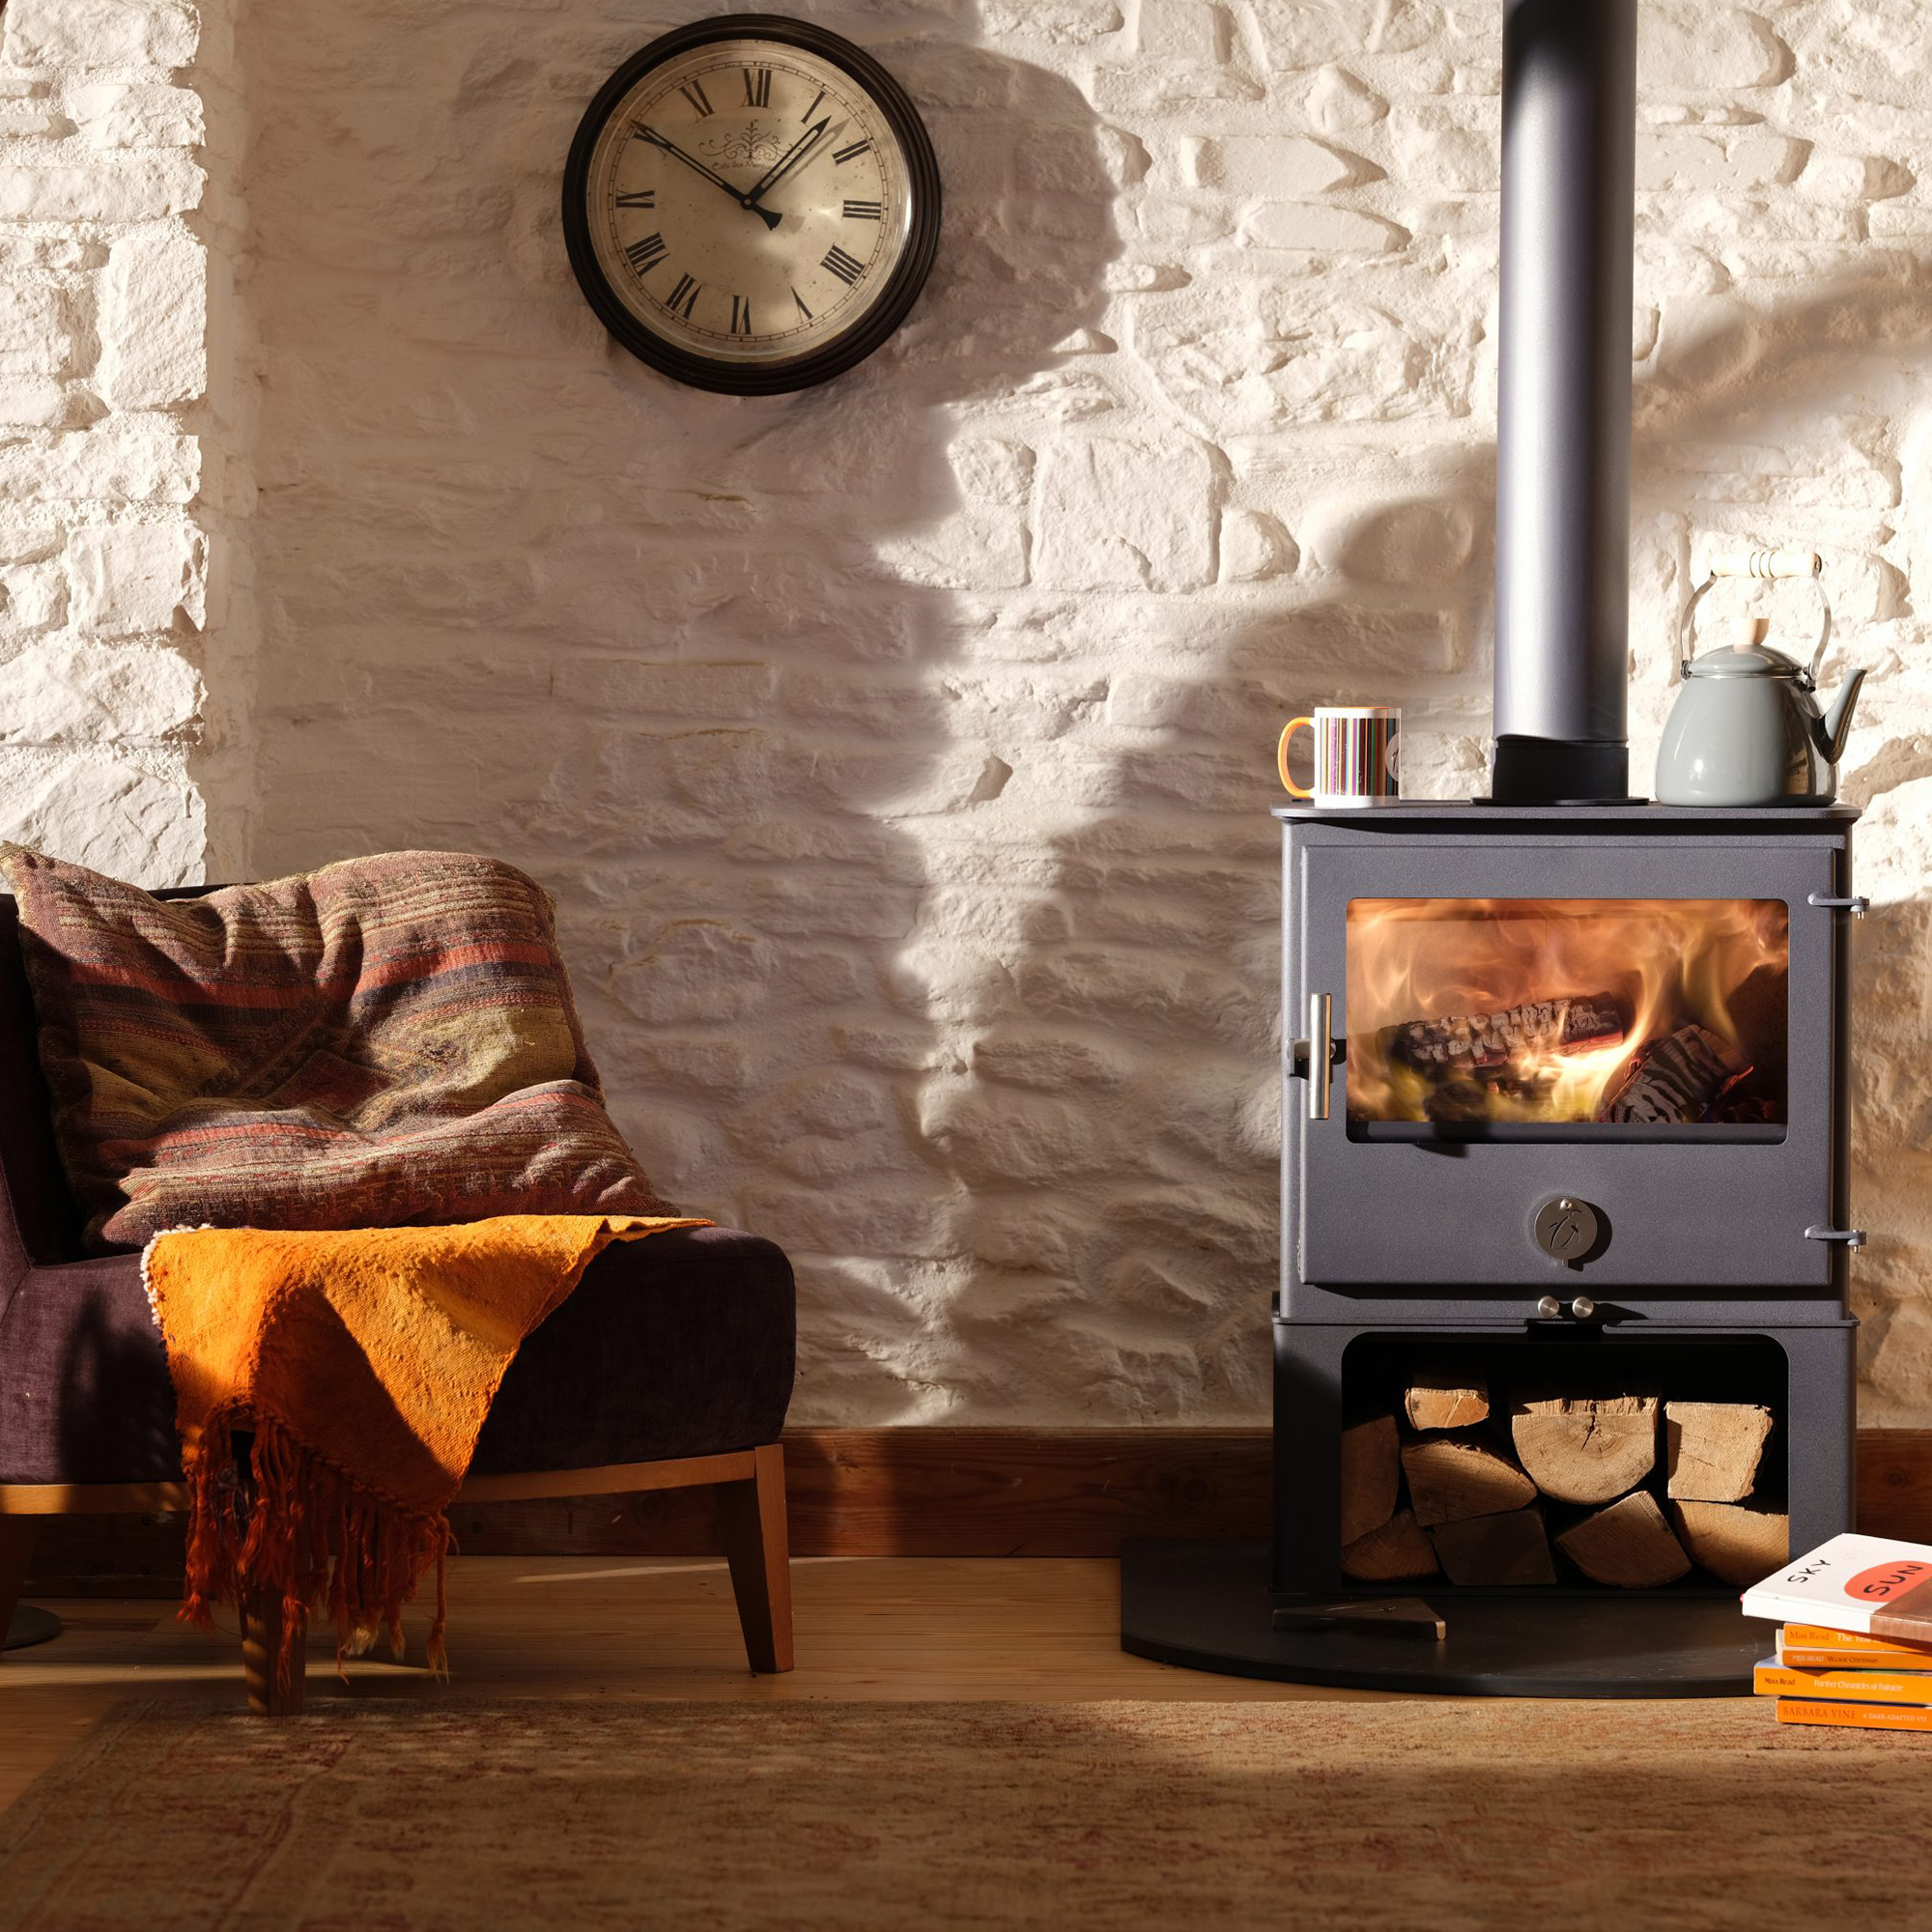 Ultimate List of Wood Stove Accessories for Everyday Use